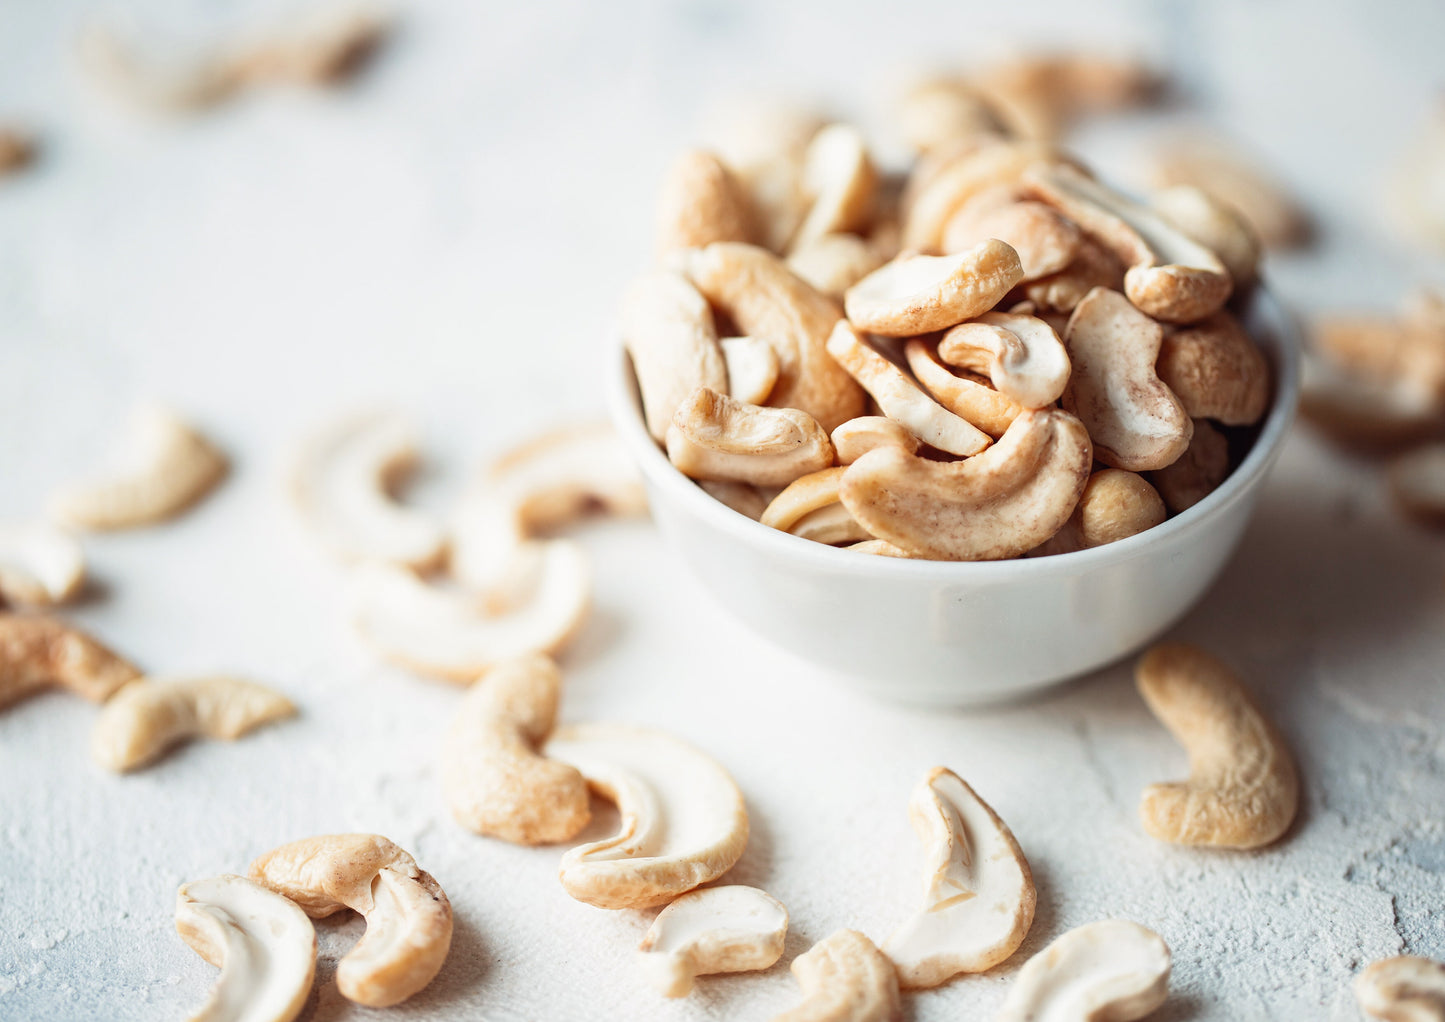 Cashew Pieces — Non-GMO Verified, Kosher, Raw, Vegan, Unsalted, Unroasted, Bulk - by Food to Live